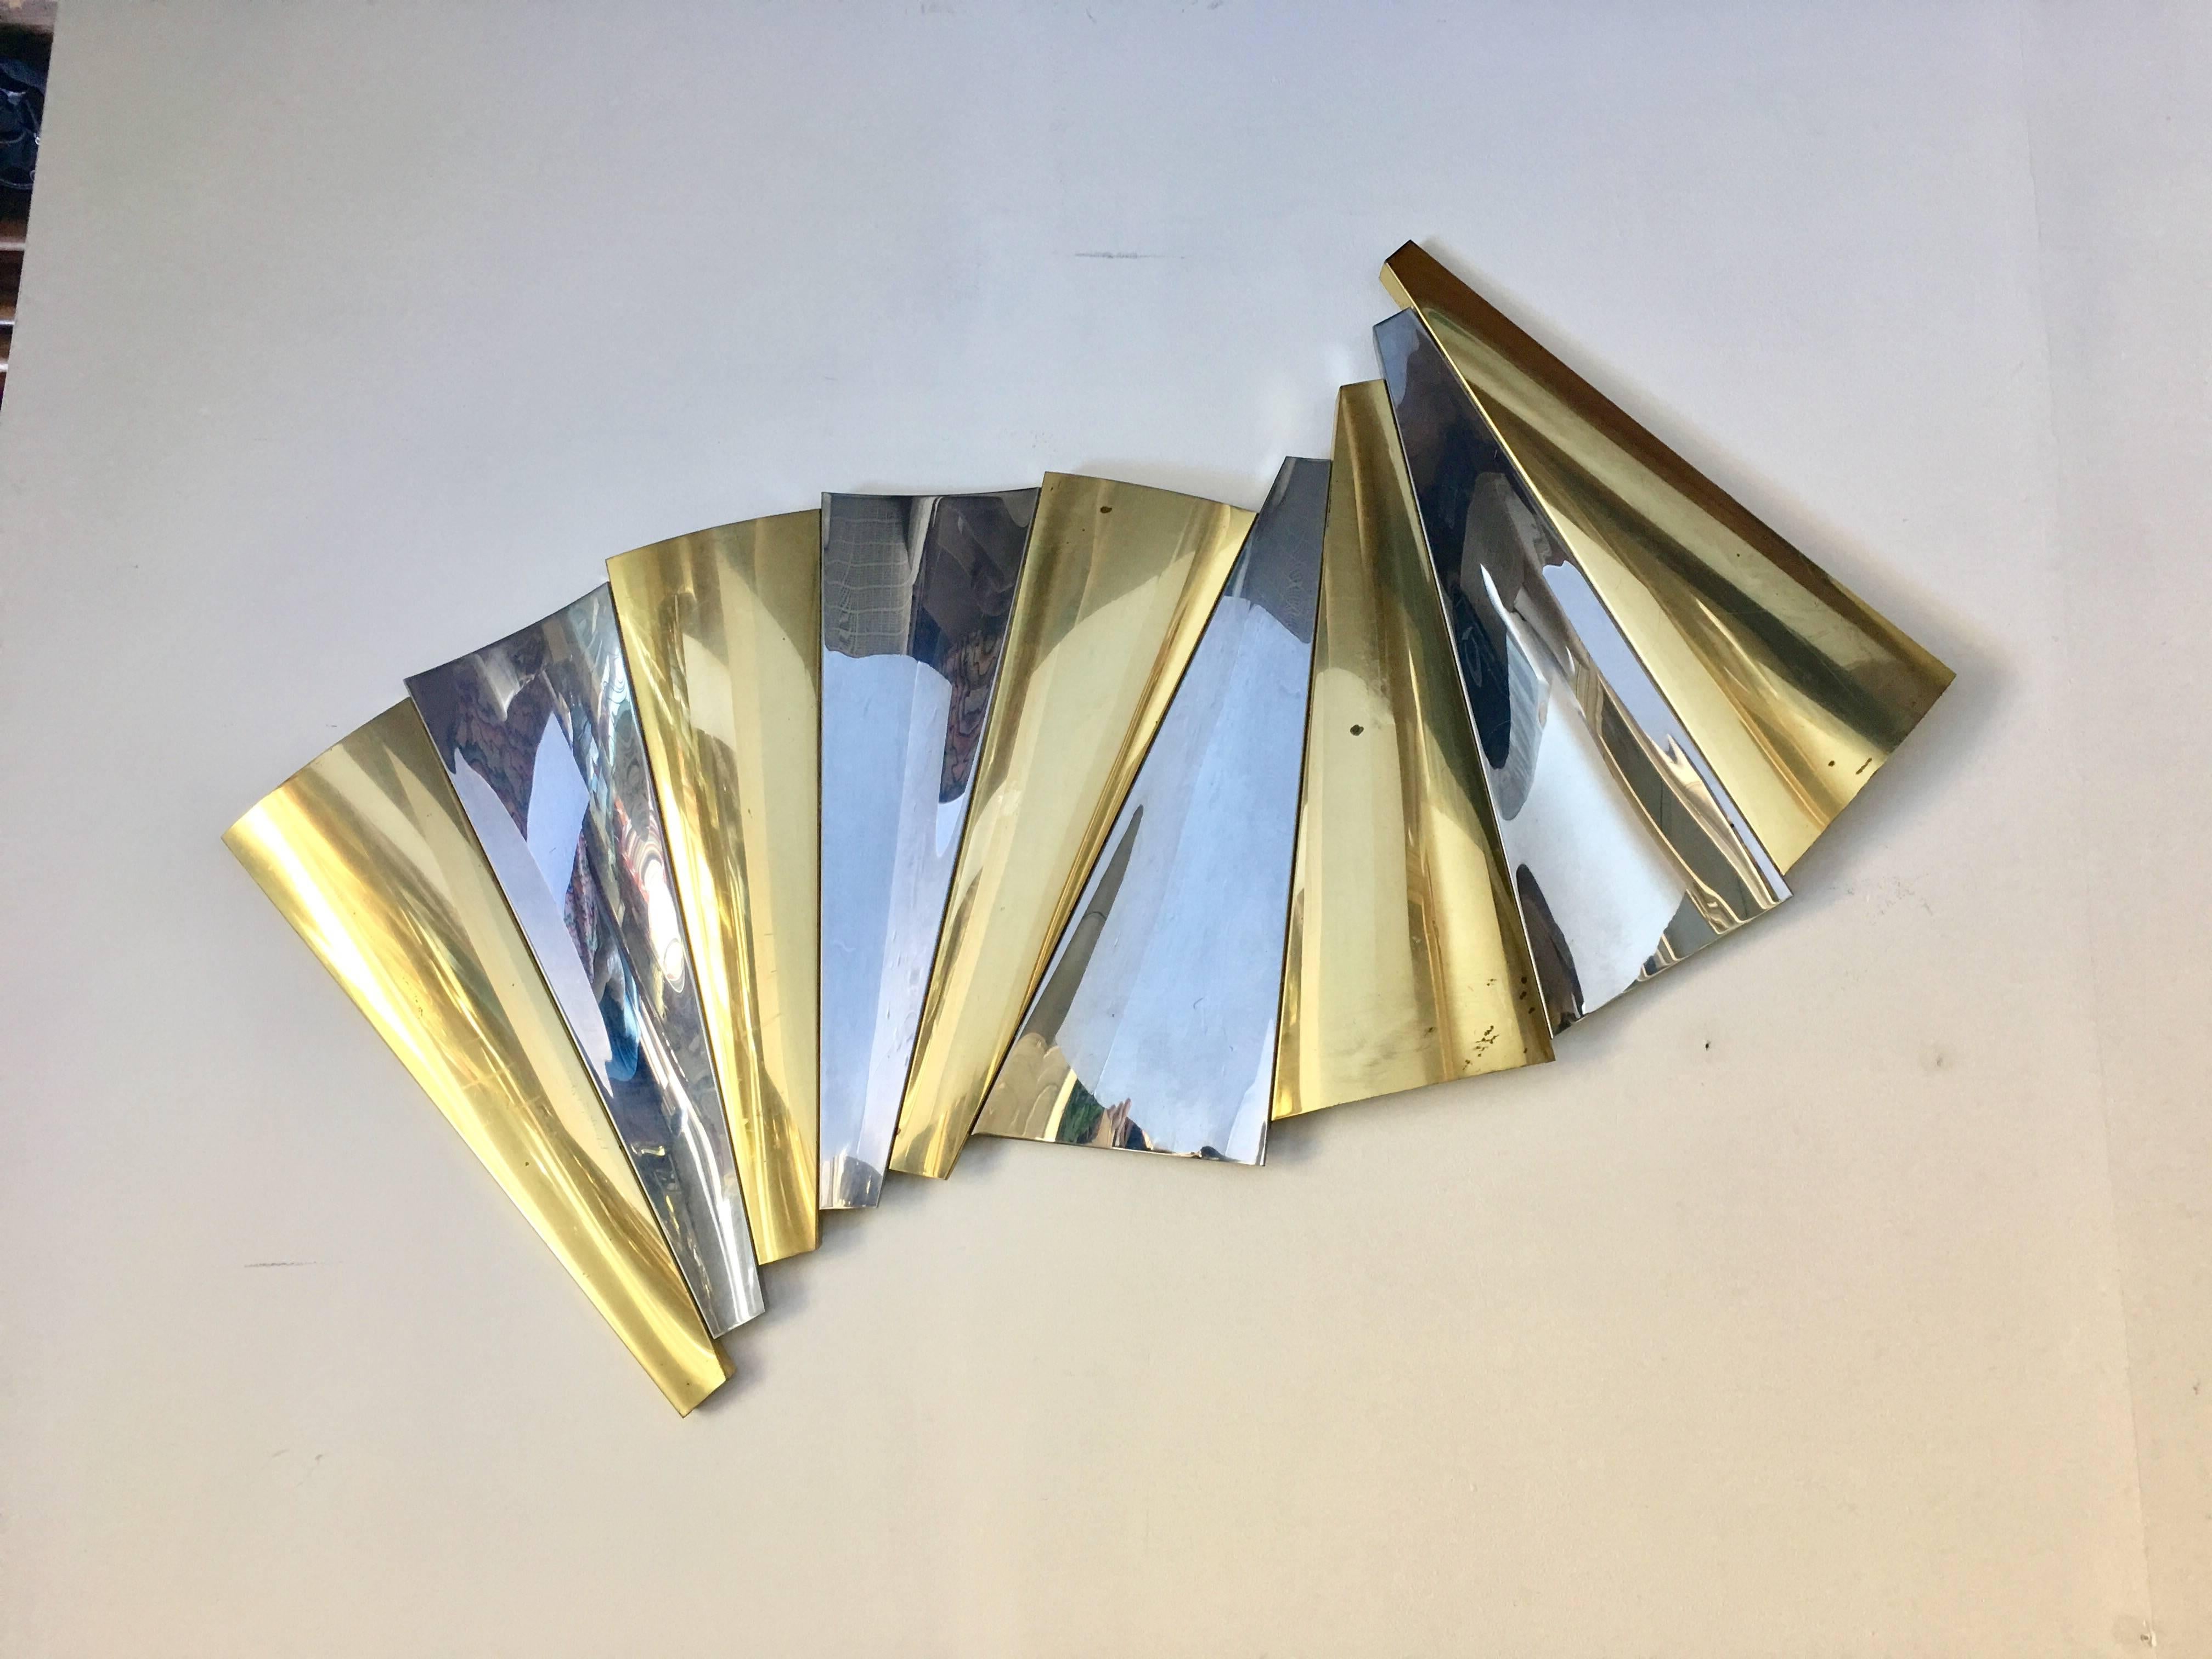 Modern brass and chrome wall sculpture by Curtis Jere. This mixed metal abstract art sculpture features a curved fan-like design. Can be hung in multiple ways or angles. Signature no longer visible due to cleaning.